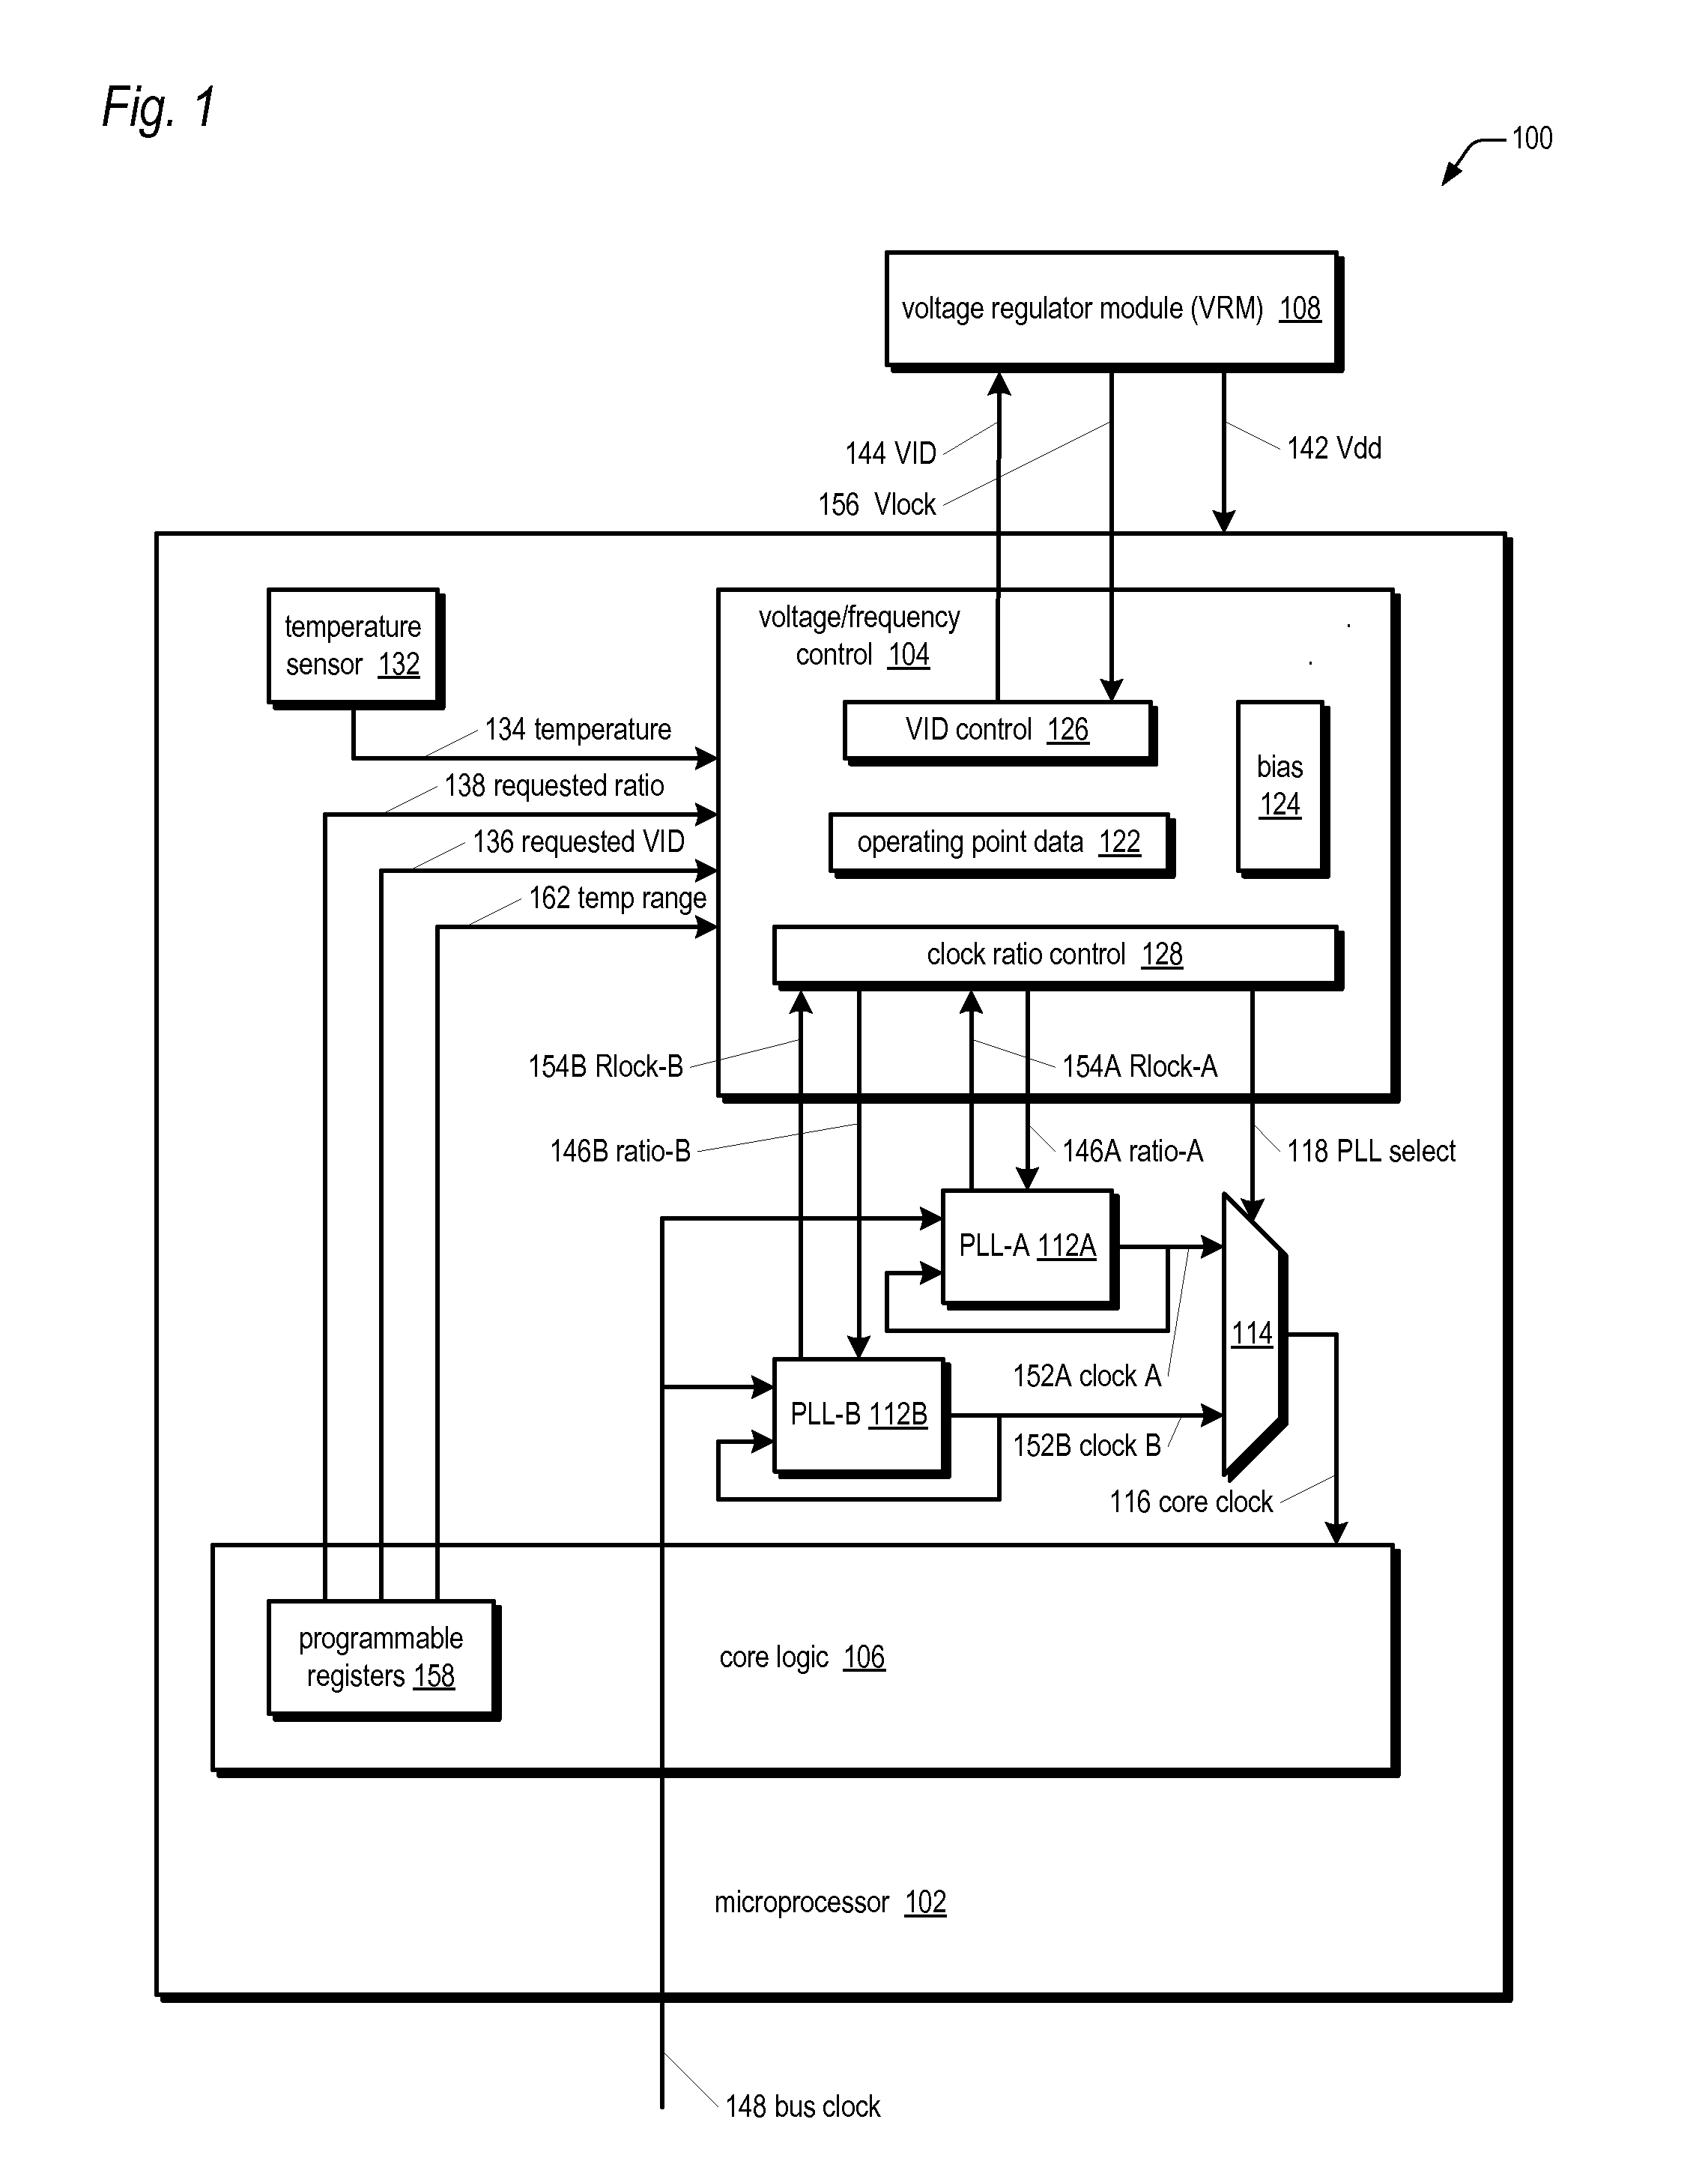 Microprocessor with improved thermal monitoring and protection mechanism